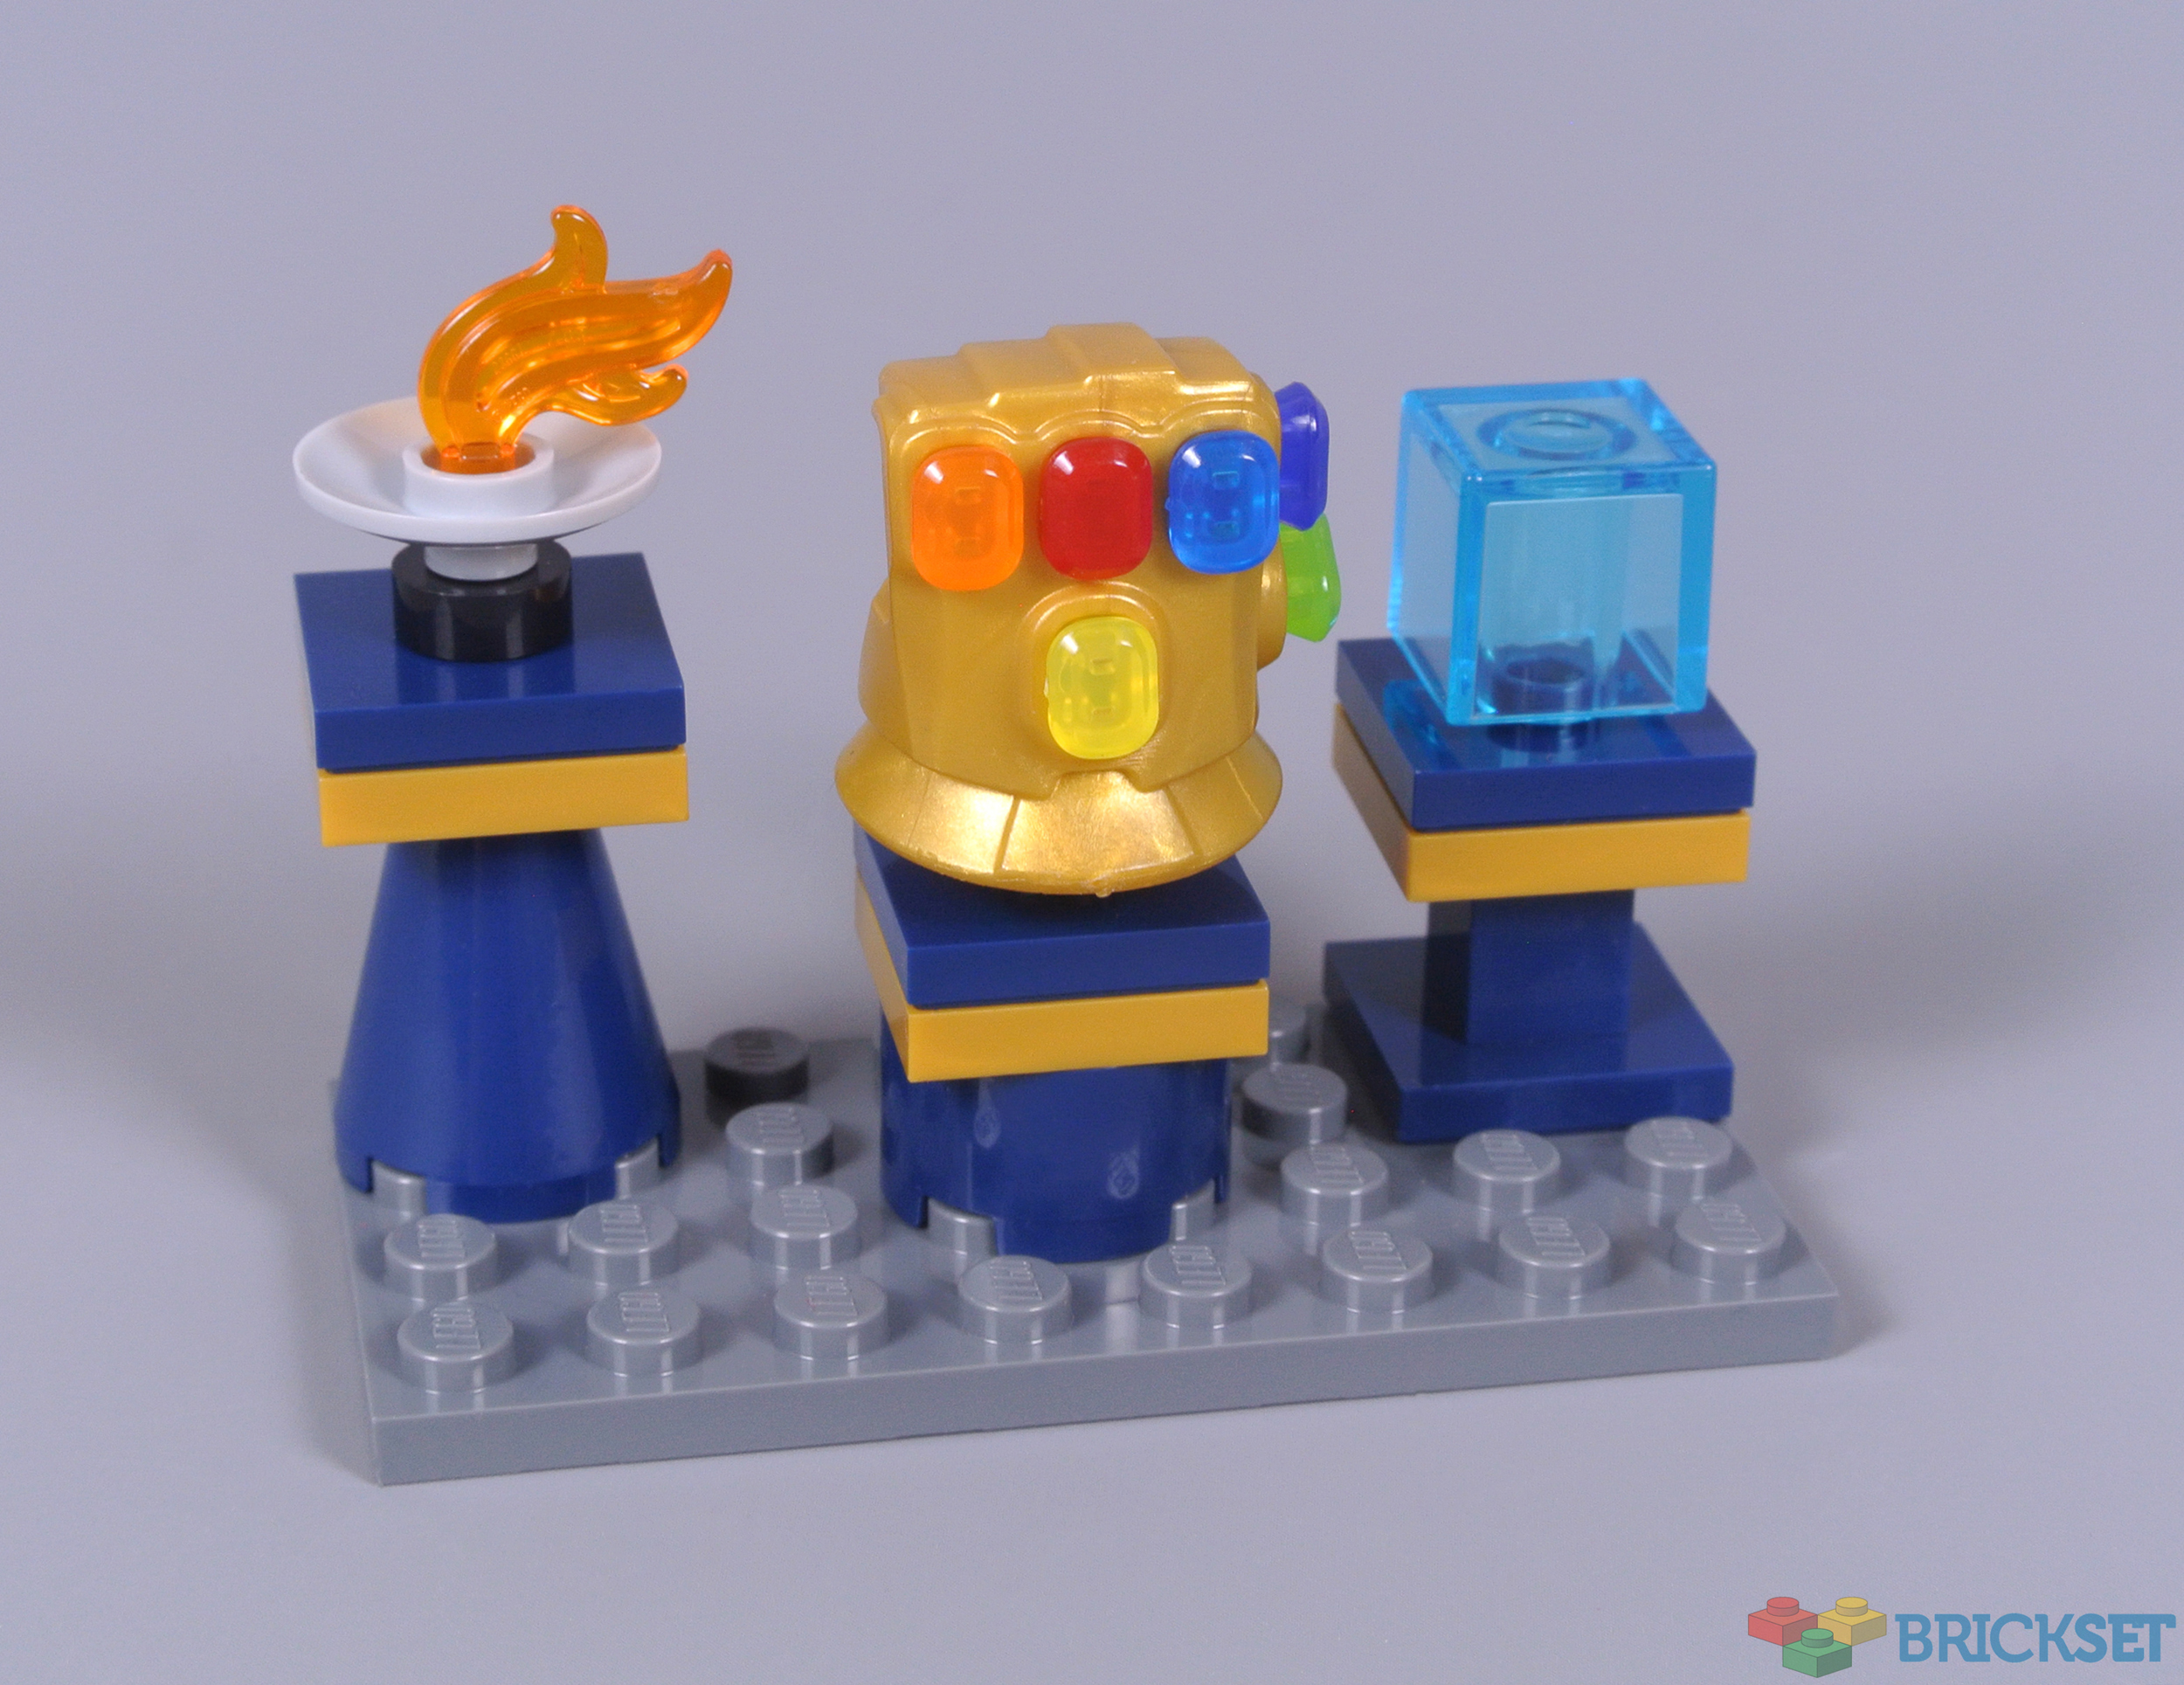 LEGO Marvel Superheroes 76209 Thor's Hammer [Review] - The